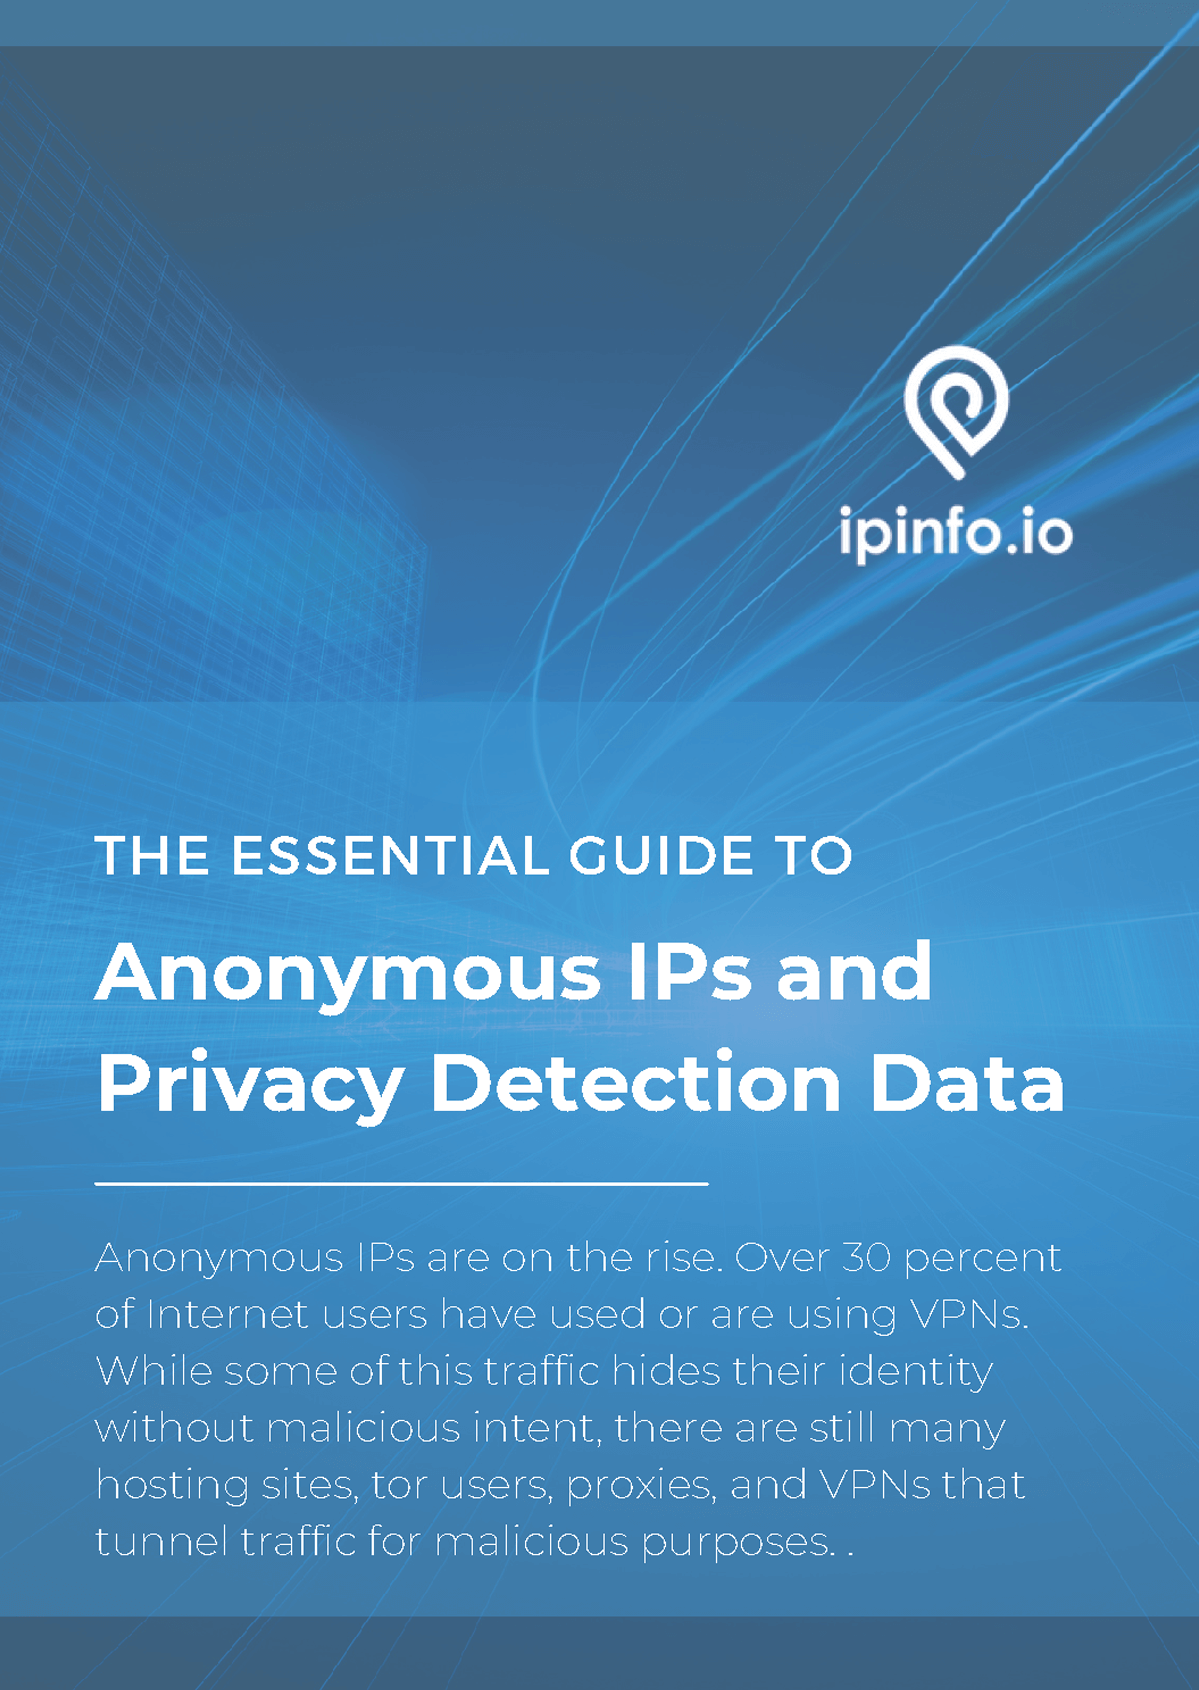 The Essential Guide to Anonymous IPs and Privacy Detection Data